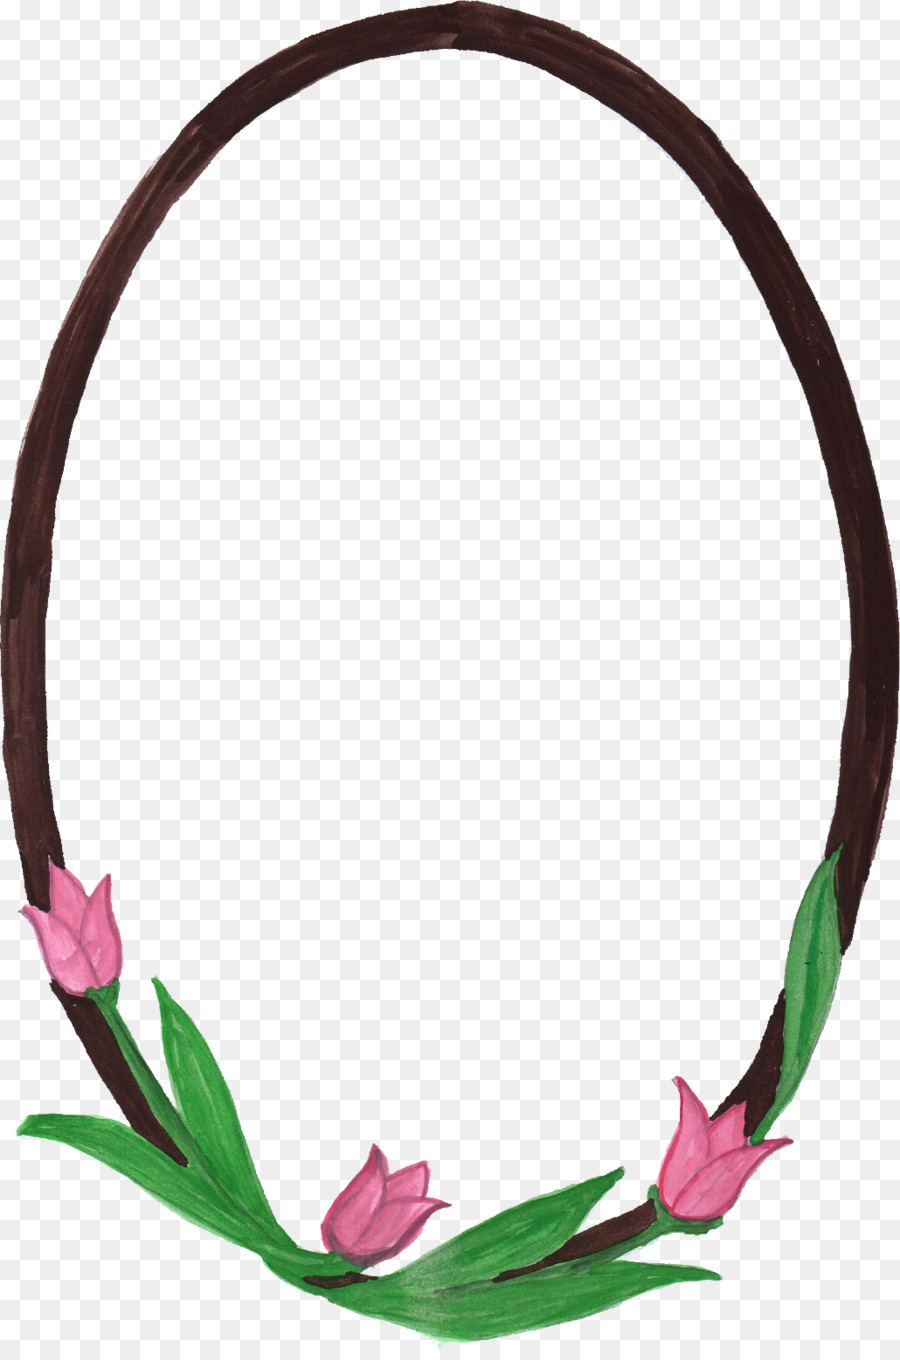 Flower Picture Frames Watercolor painting - oval png download - 1030*1550 - Free Transparent Flower png Download.